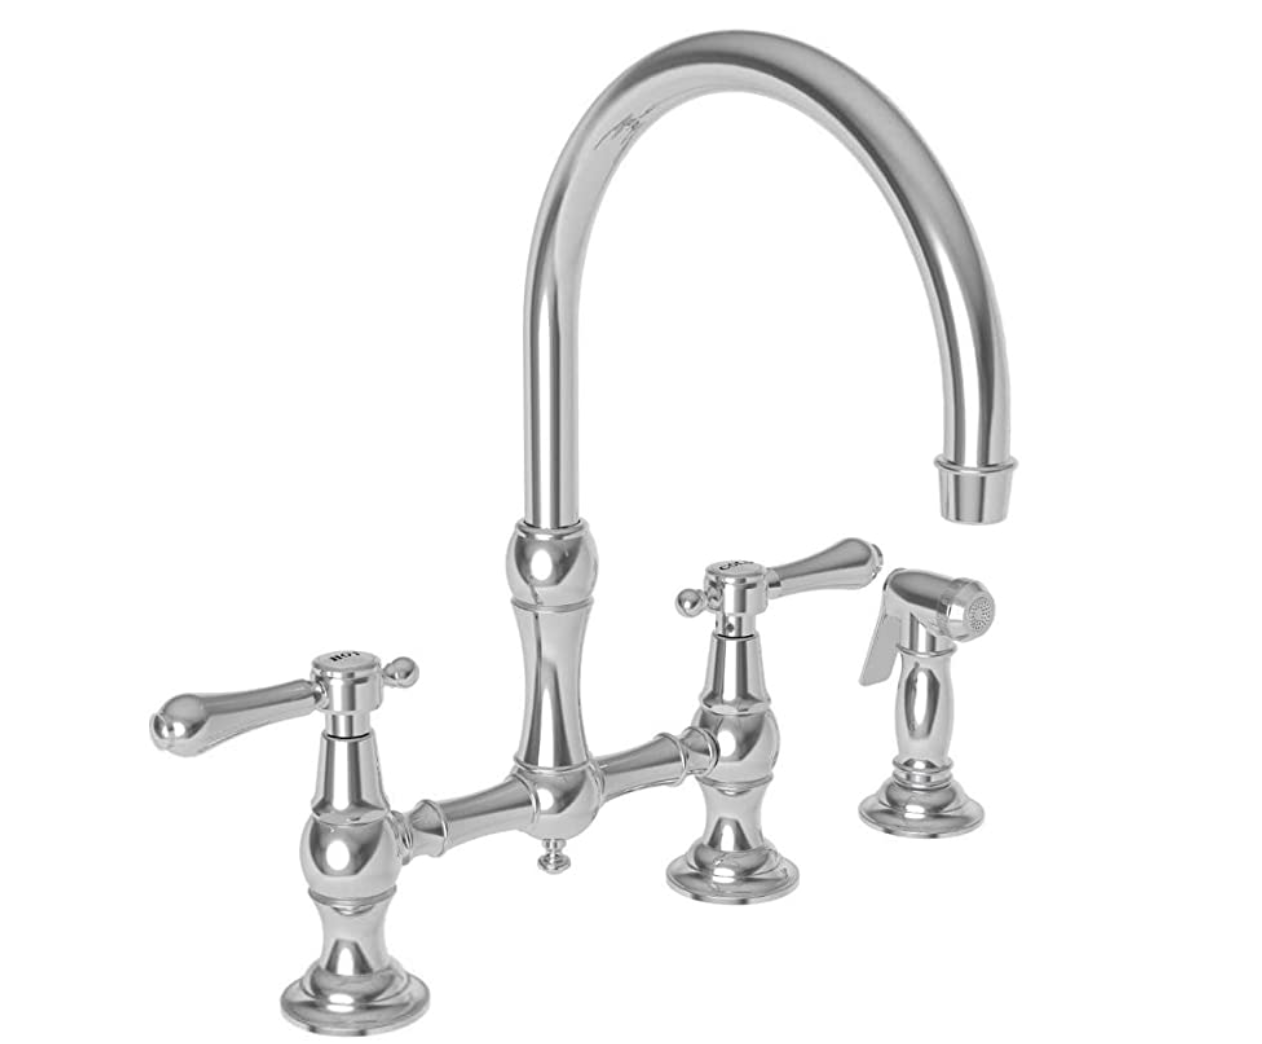 Kitchen Bridge Faucet with Side Spray - 9458 - POLISHED NICKEL - Chesterfield